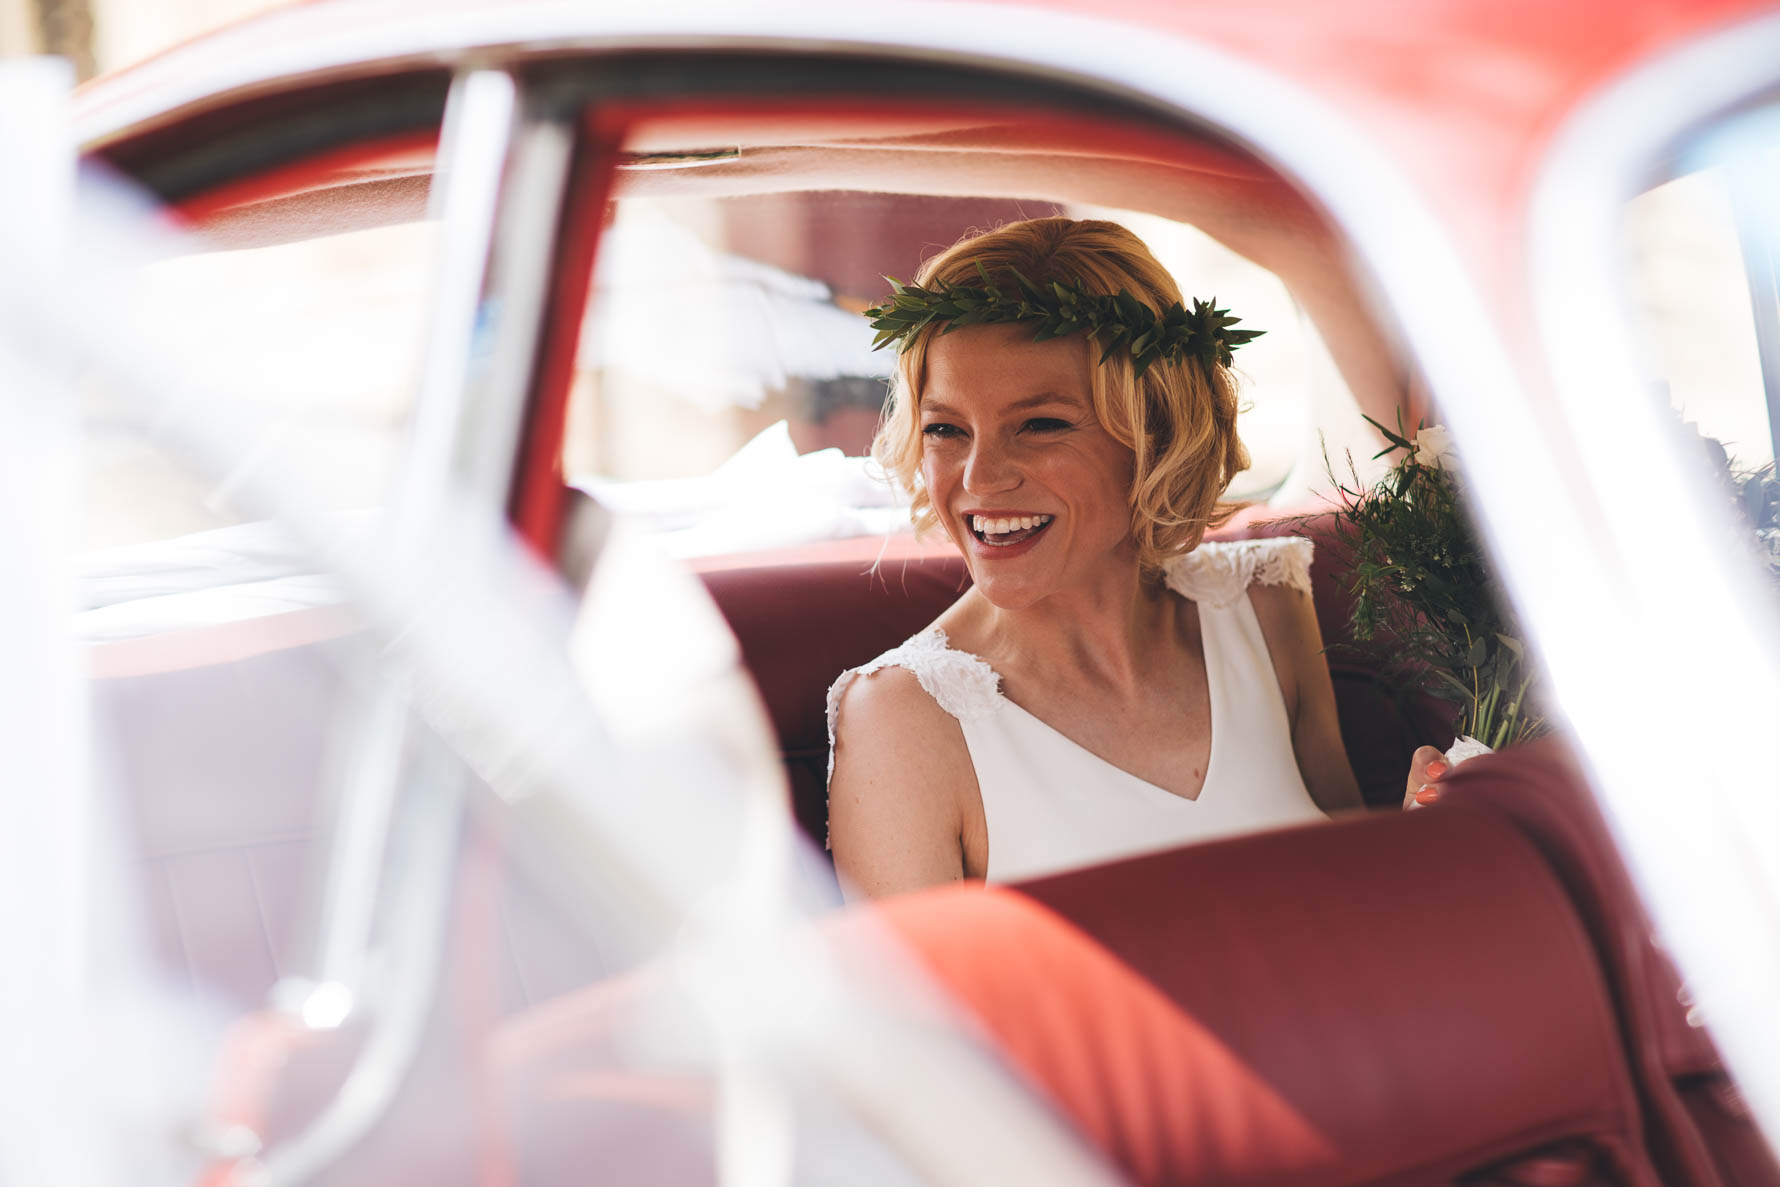 View through the open door of a vintage red car of the bride inside who has a leaf garland on her head